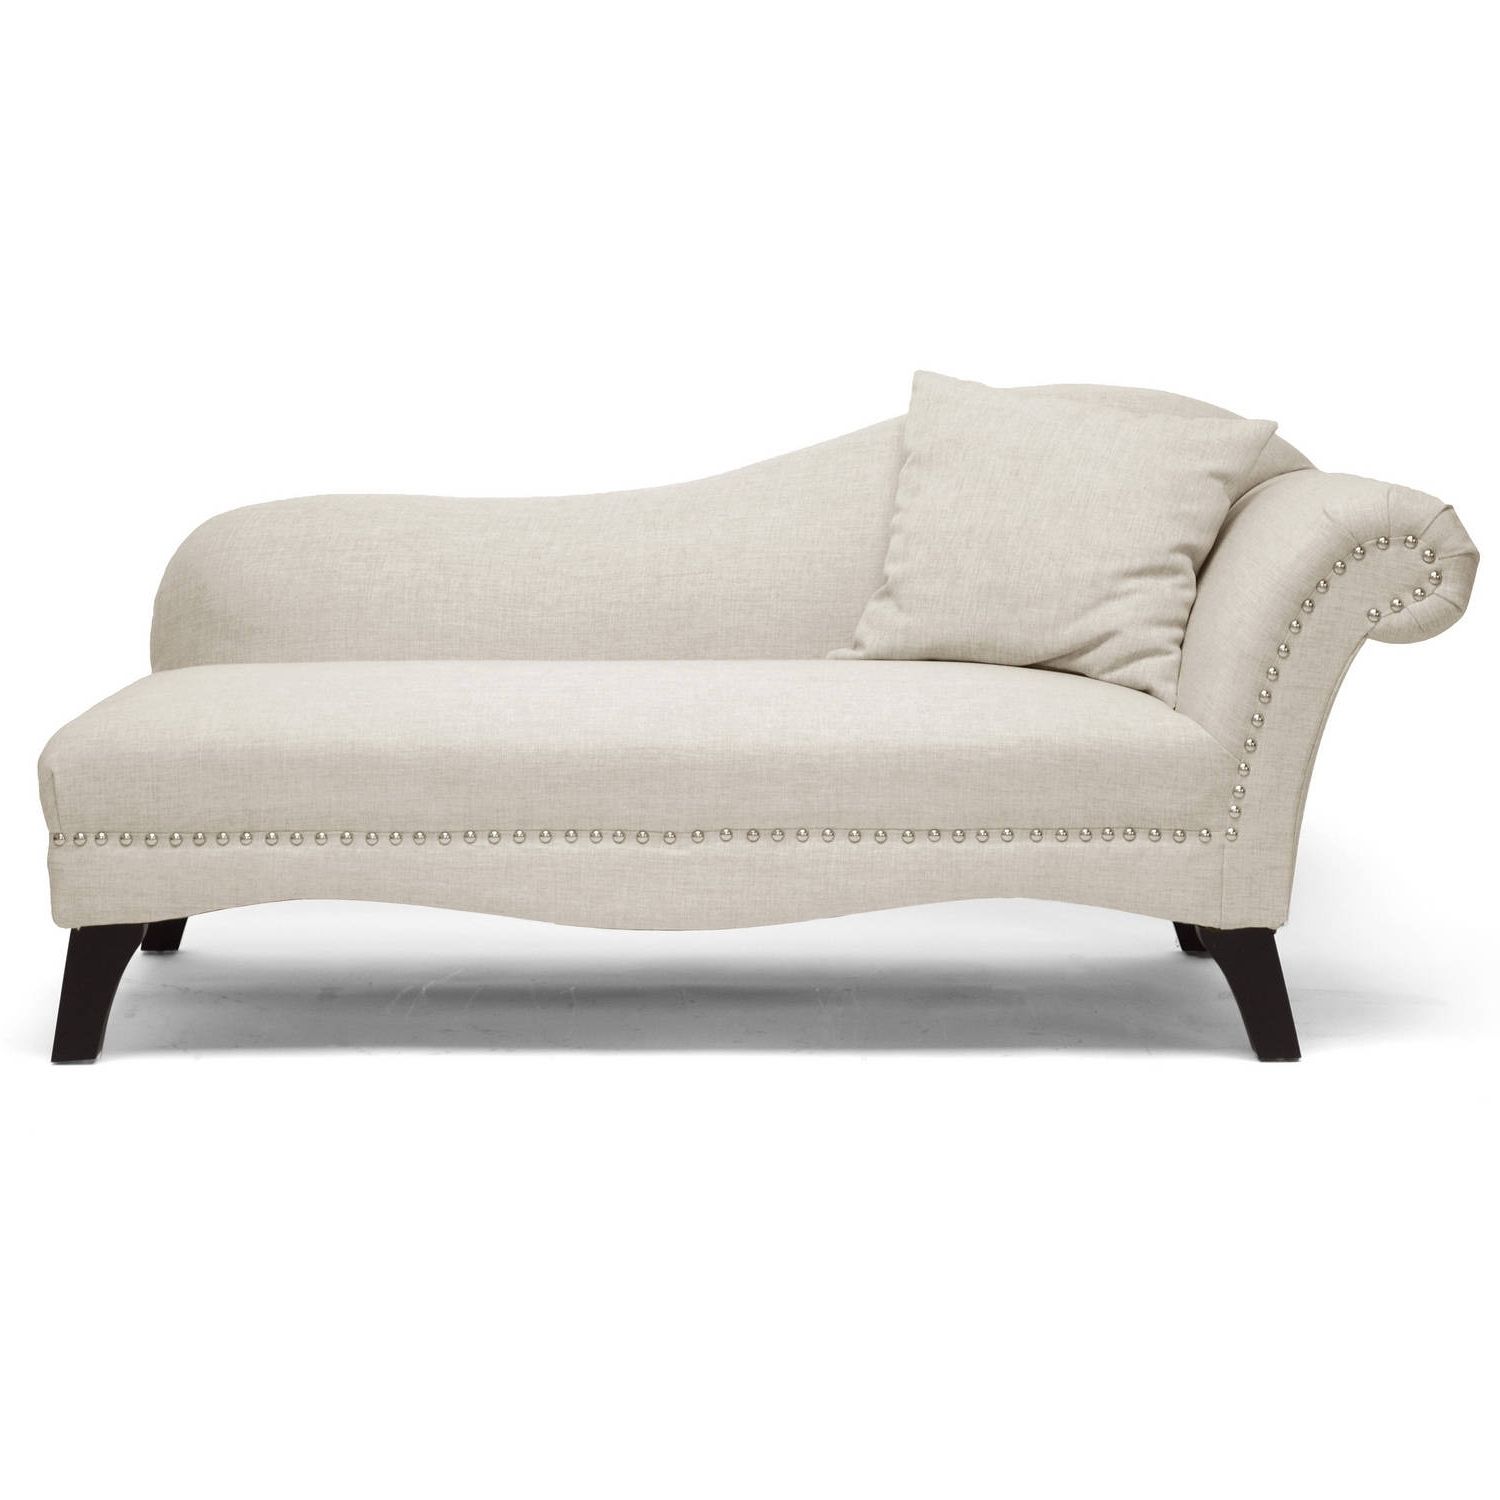 Tufted Chaise Lounge Chairs Regarding Most Current Chaise Lounges – Walmart (Photo 15 of 15)